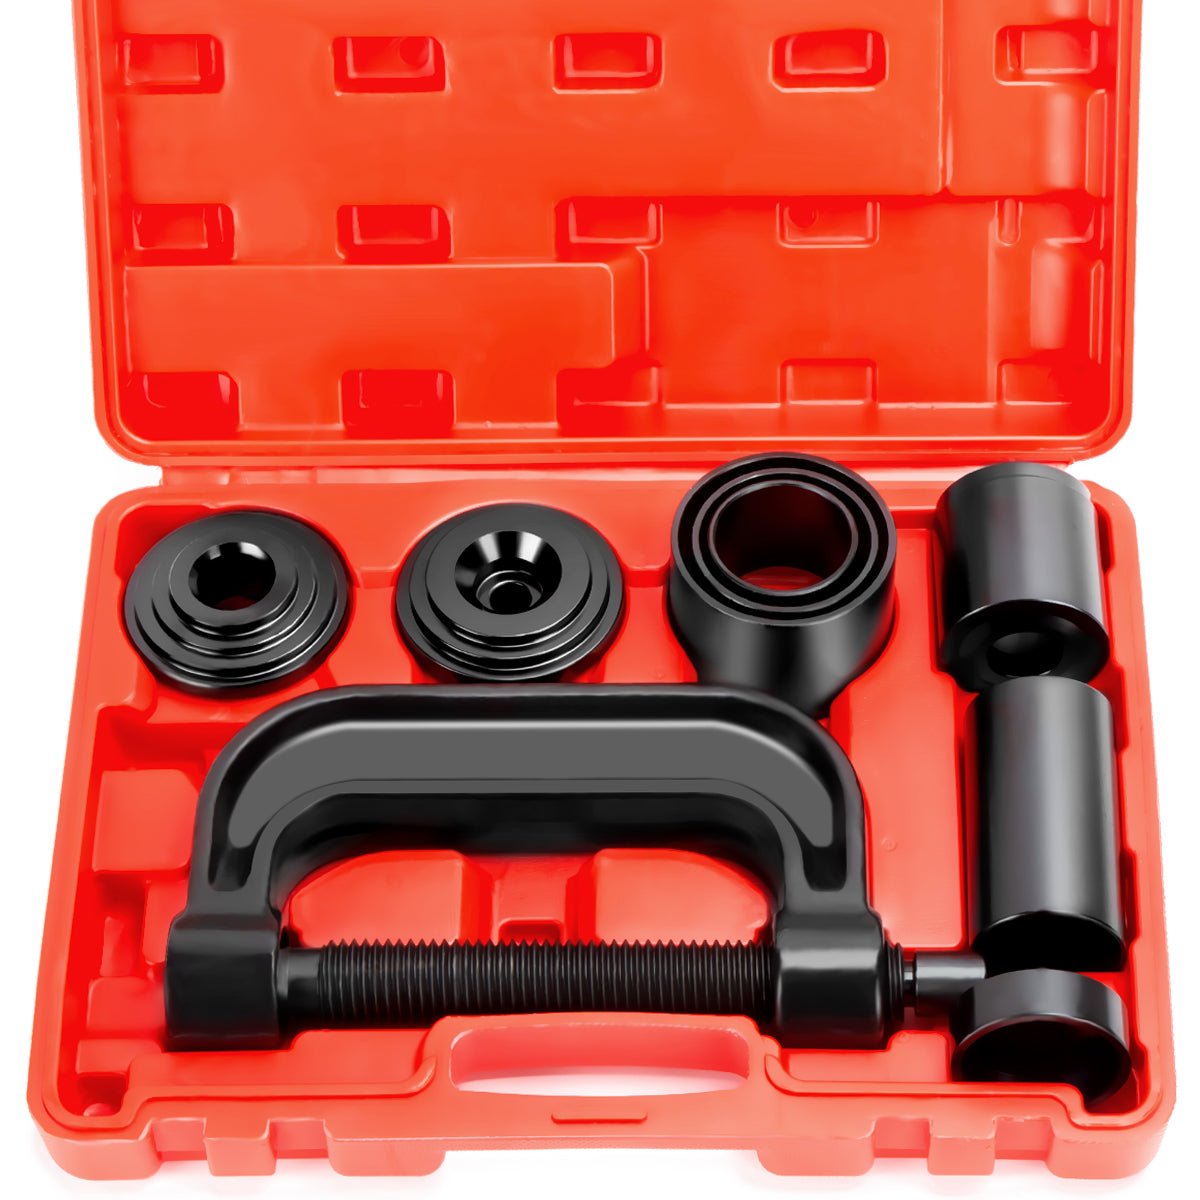 Heavy Duty Ball Joints Press, Ubolts and Brake Anchor Pins Press and Removal Tool xccscss.